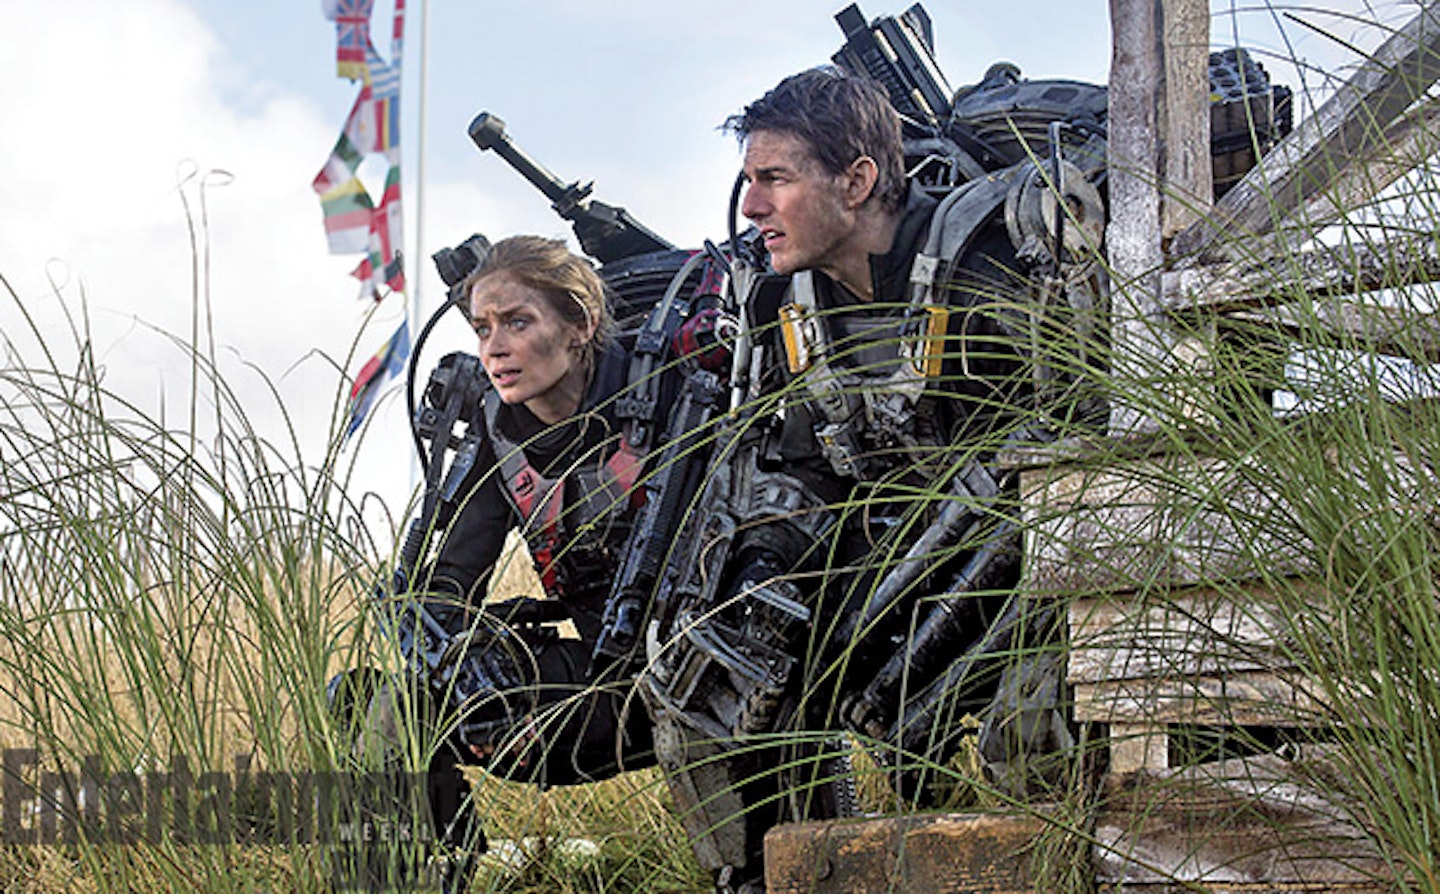 New Still From All You Need Is Kill